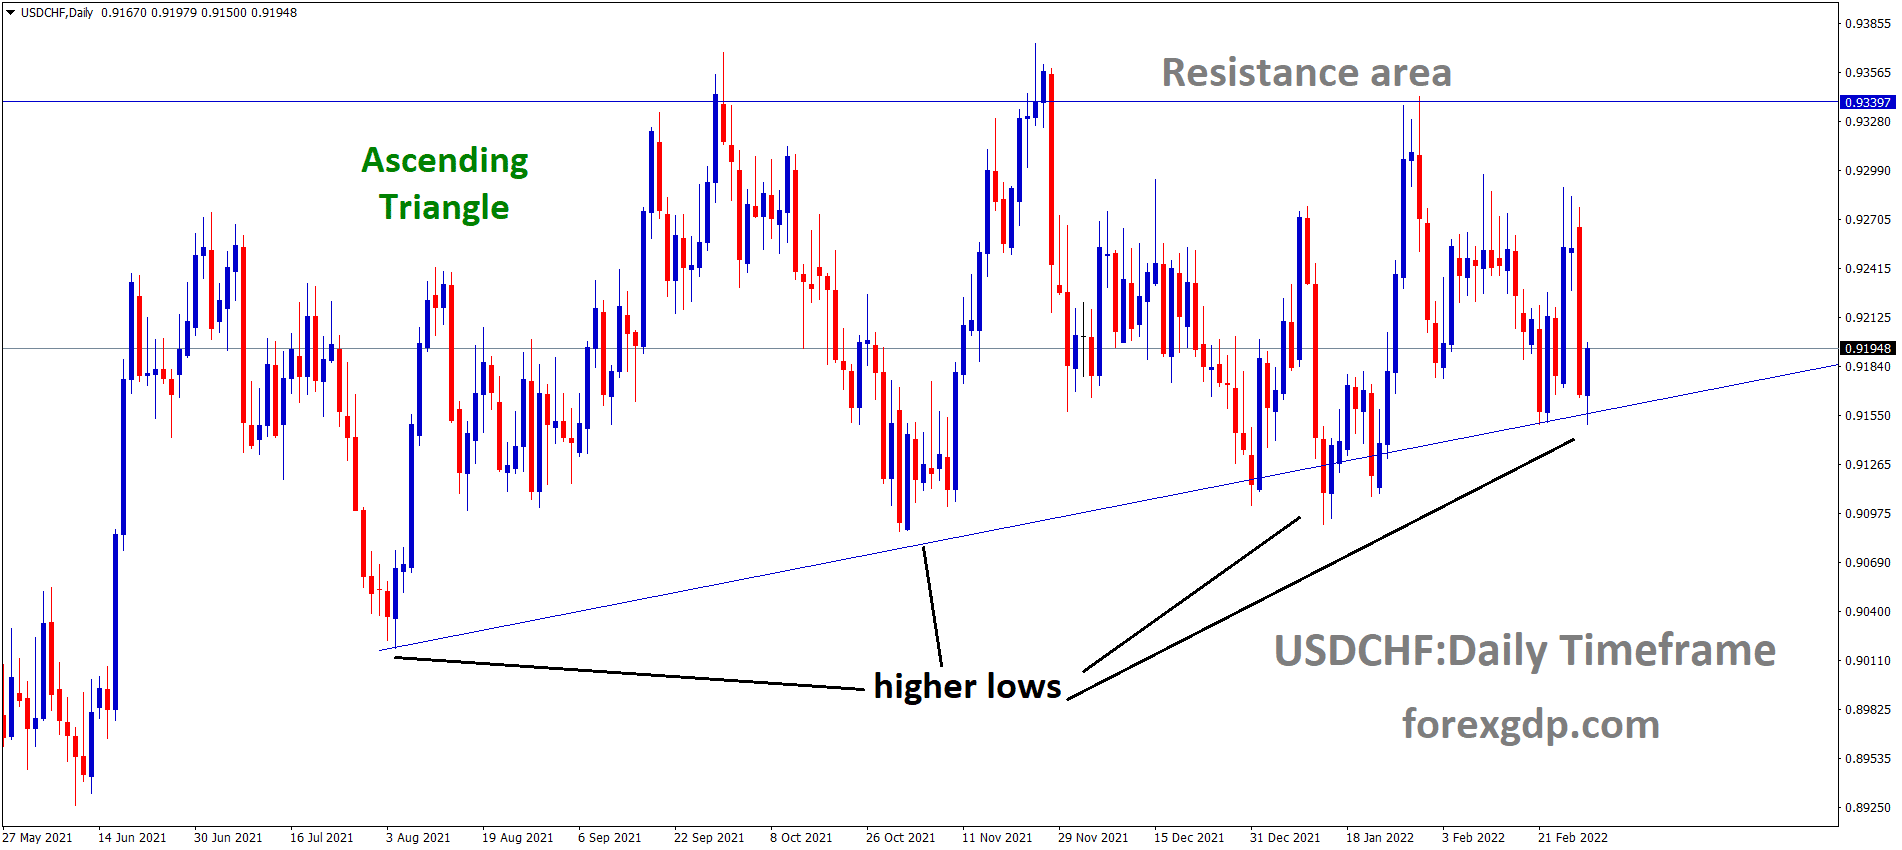 USDCHF is moving in an ascending triangle pattern and the market has rebounded from the higher low area of the pattern.